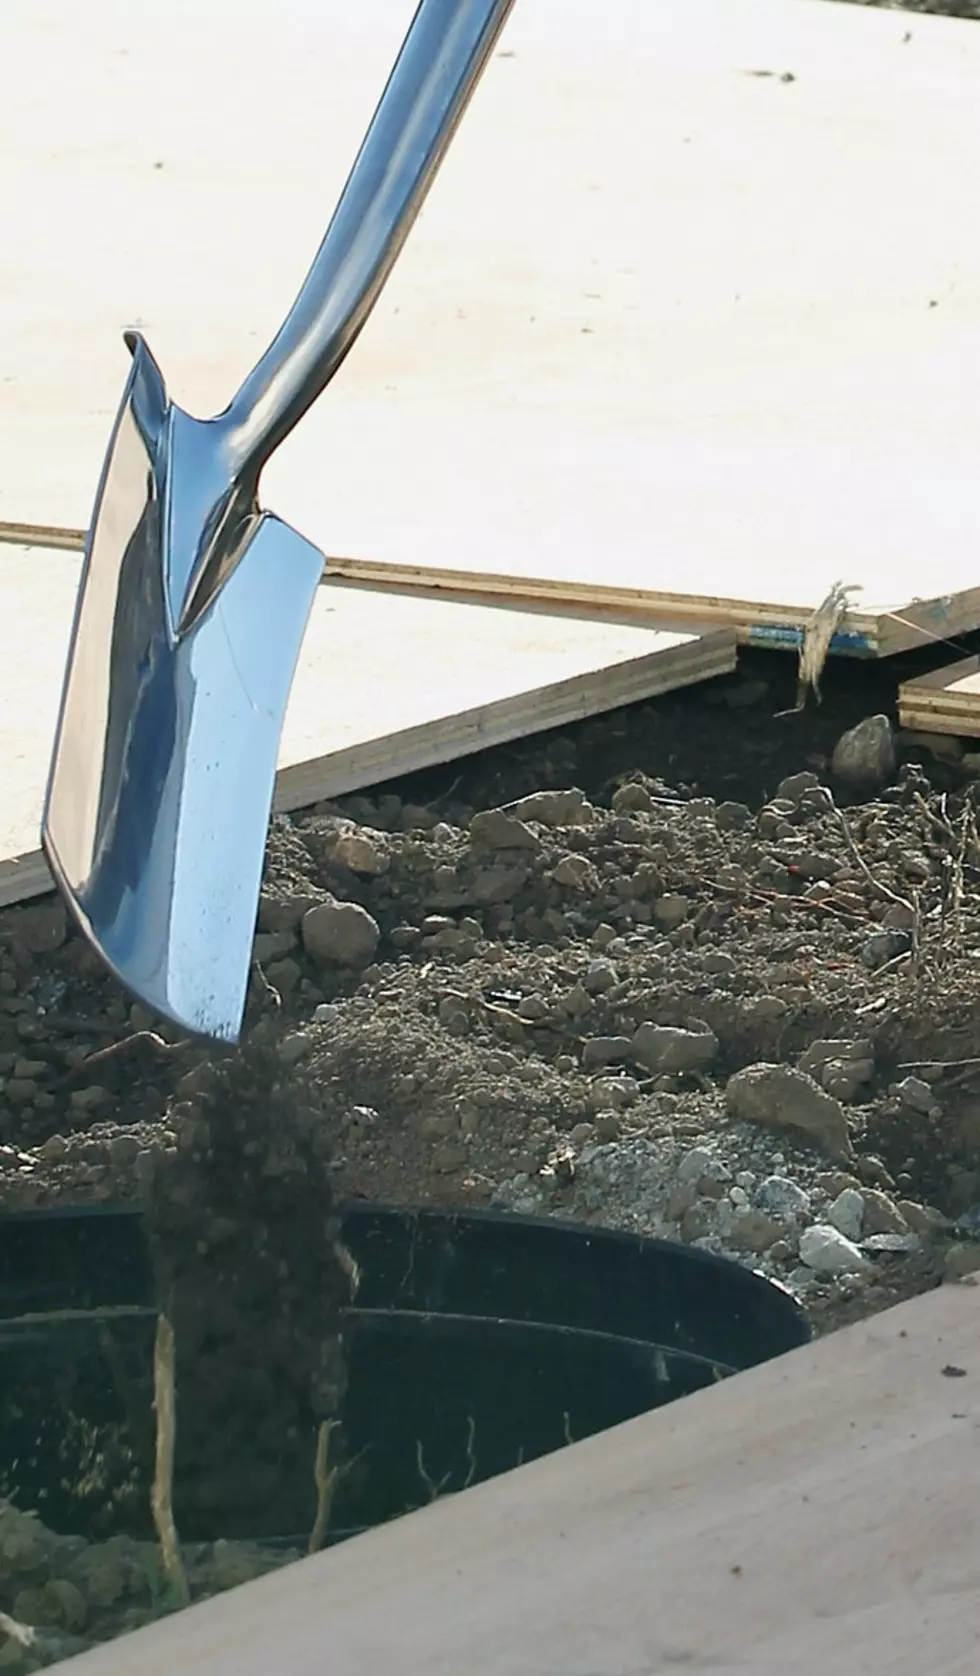 Free Beer & Hot Wings: Charlotte Time Capsule Buried for Half Century Is Complete Flop [Video]